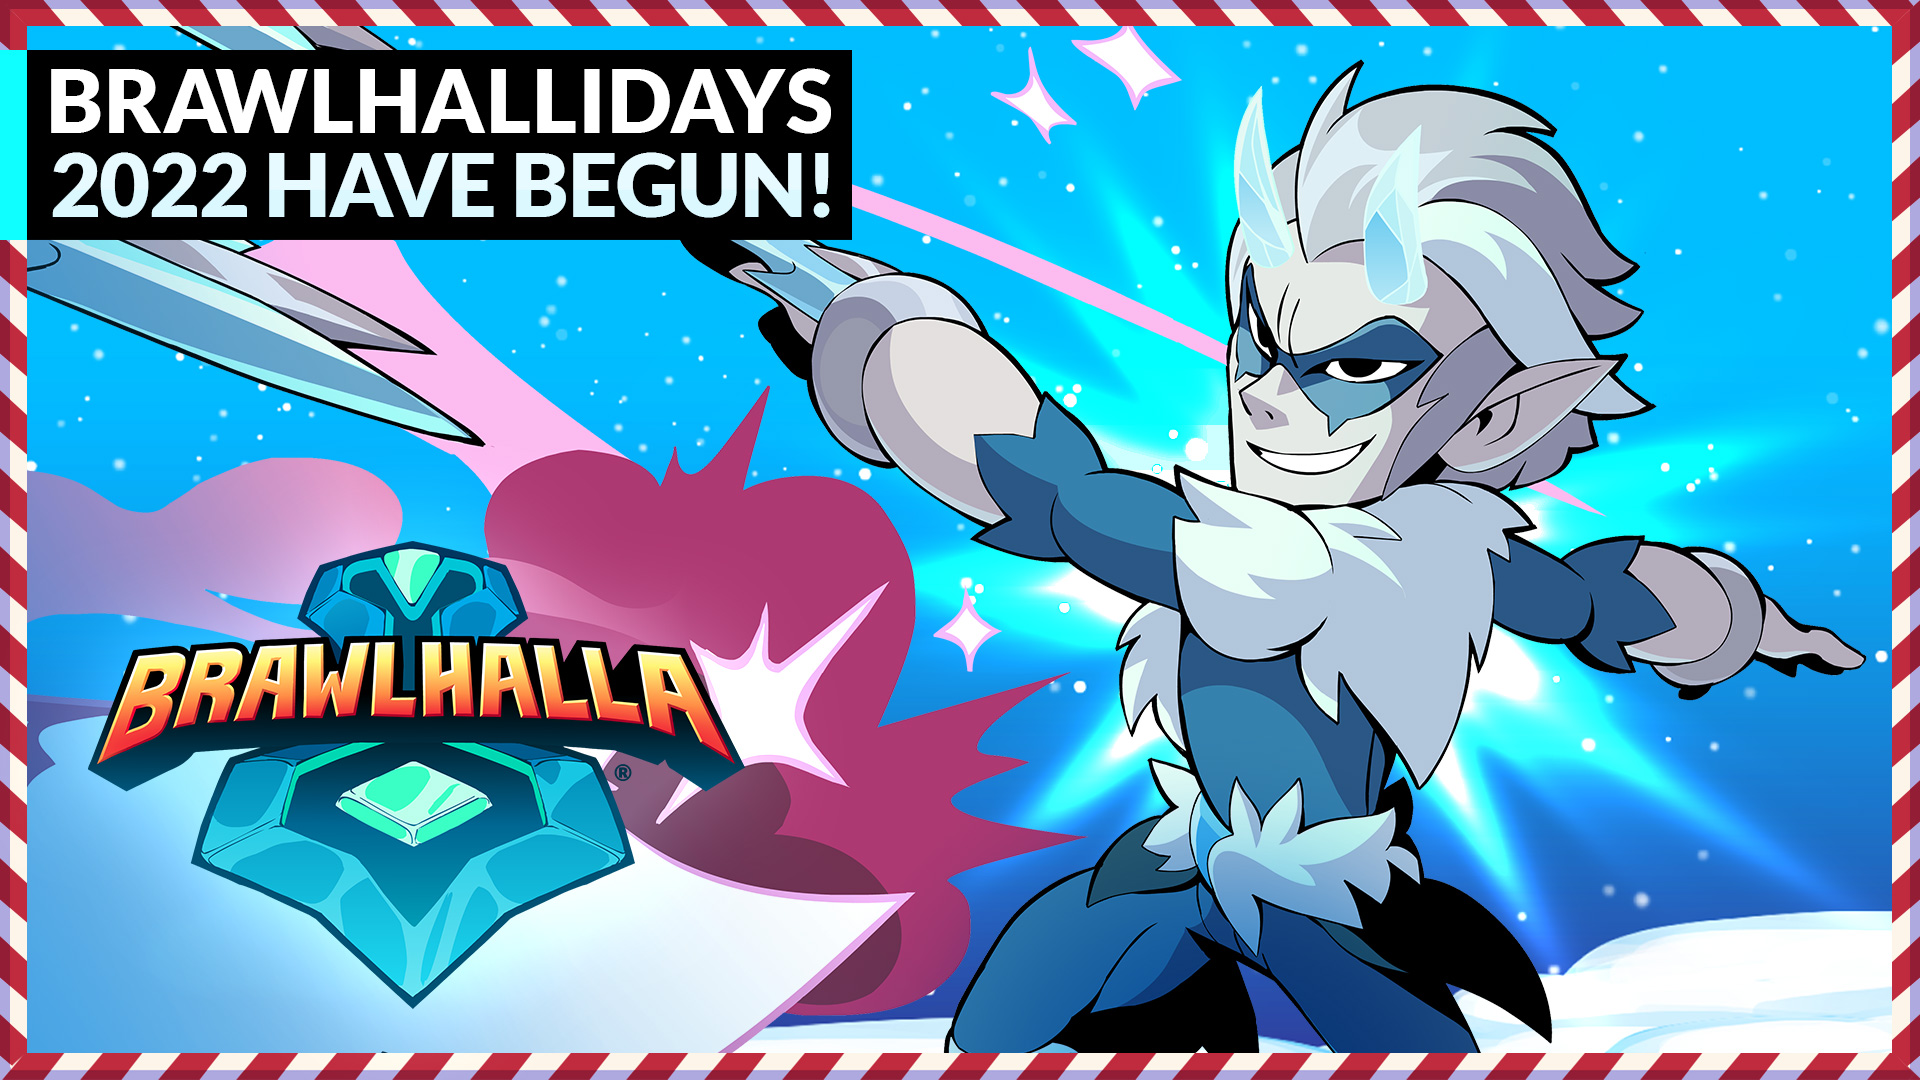 Have a Holly Jolly Brawlhallidays 2022, the Best Time of the Year!